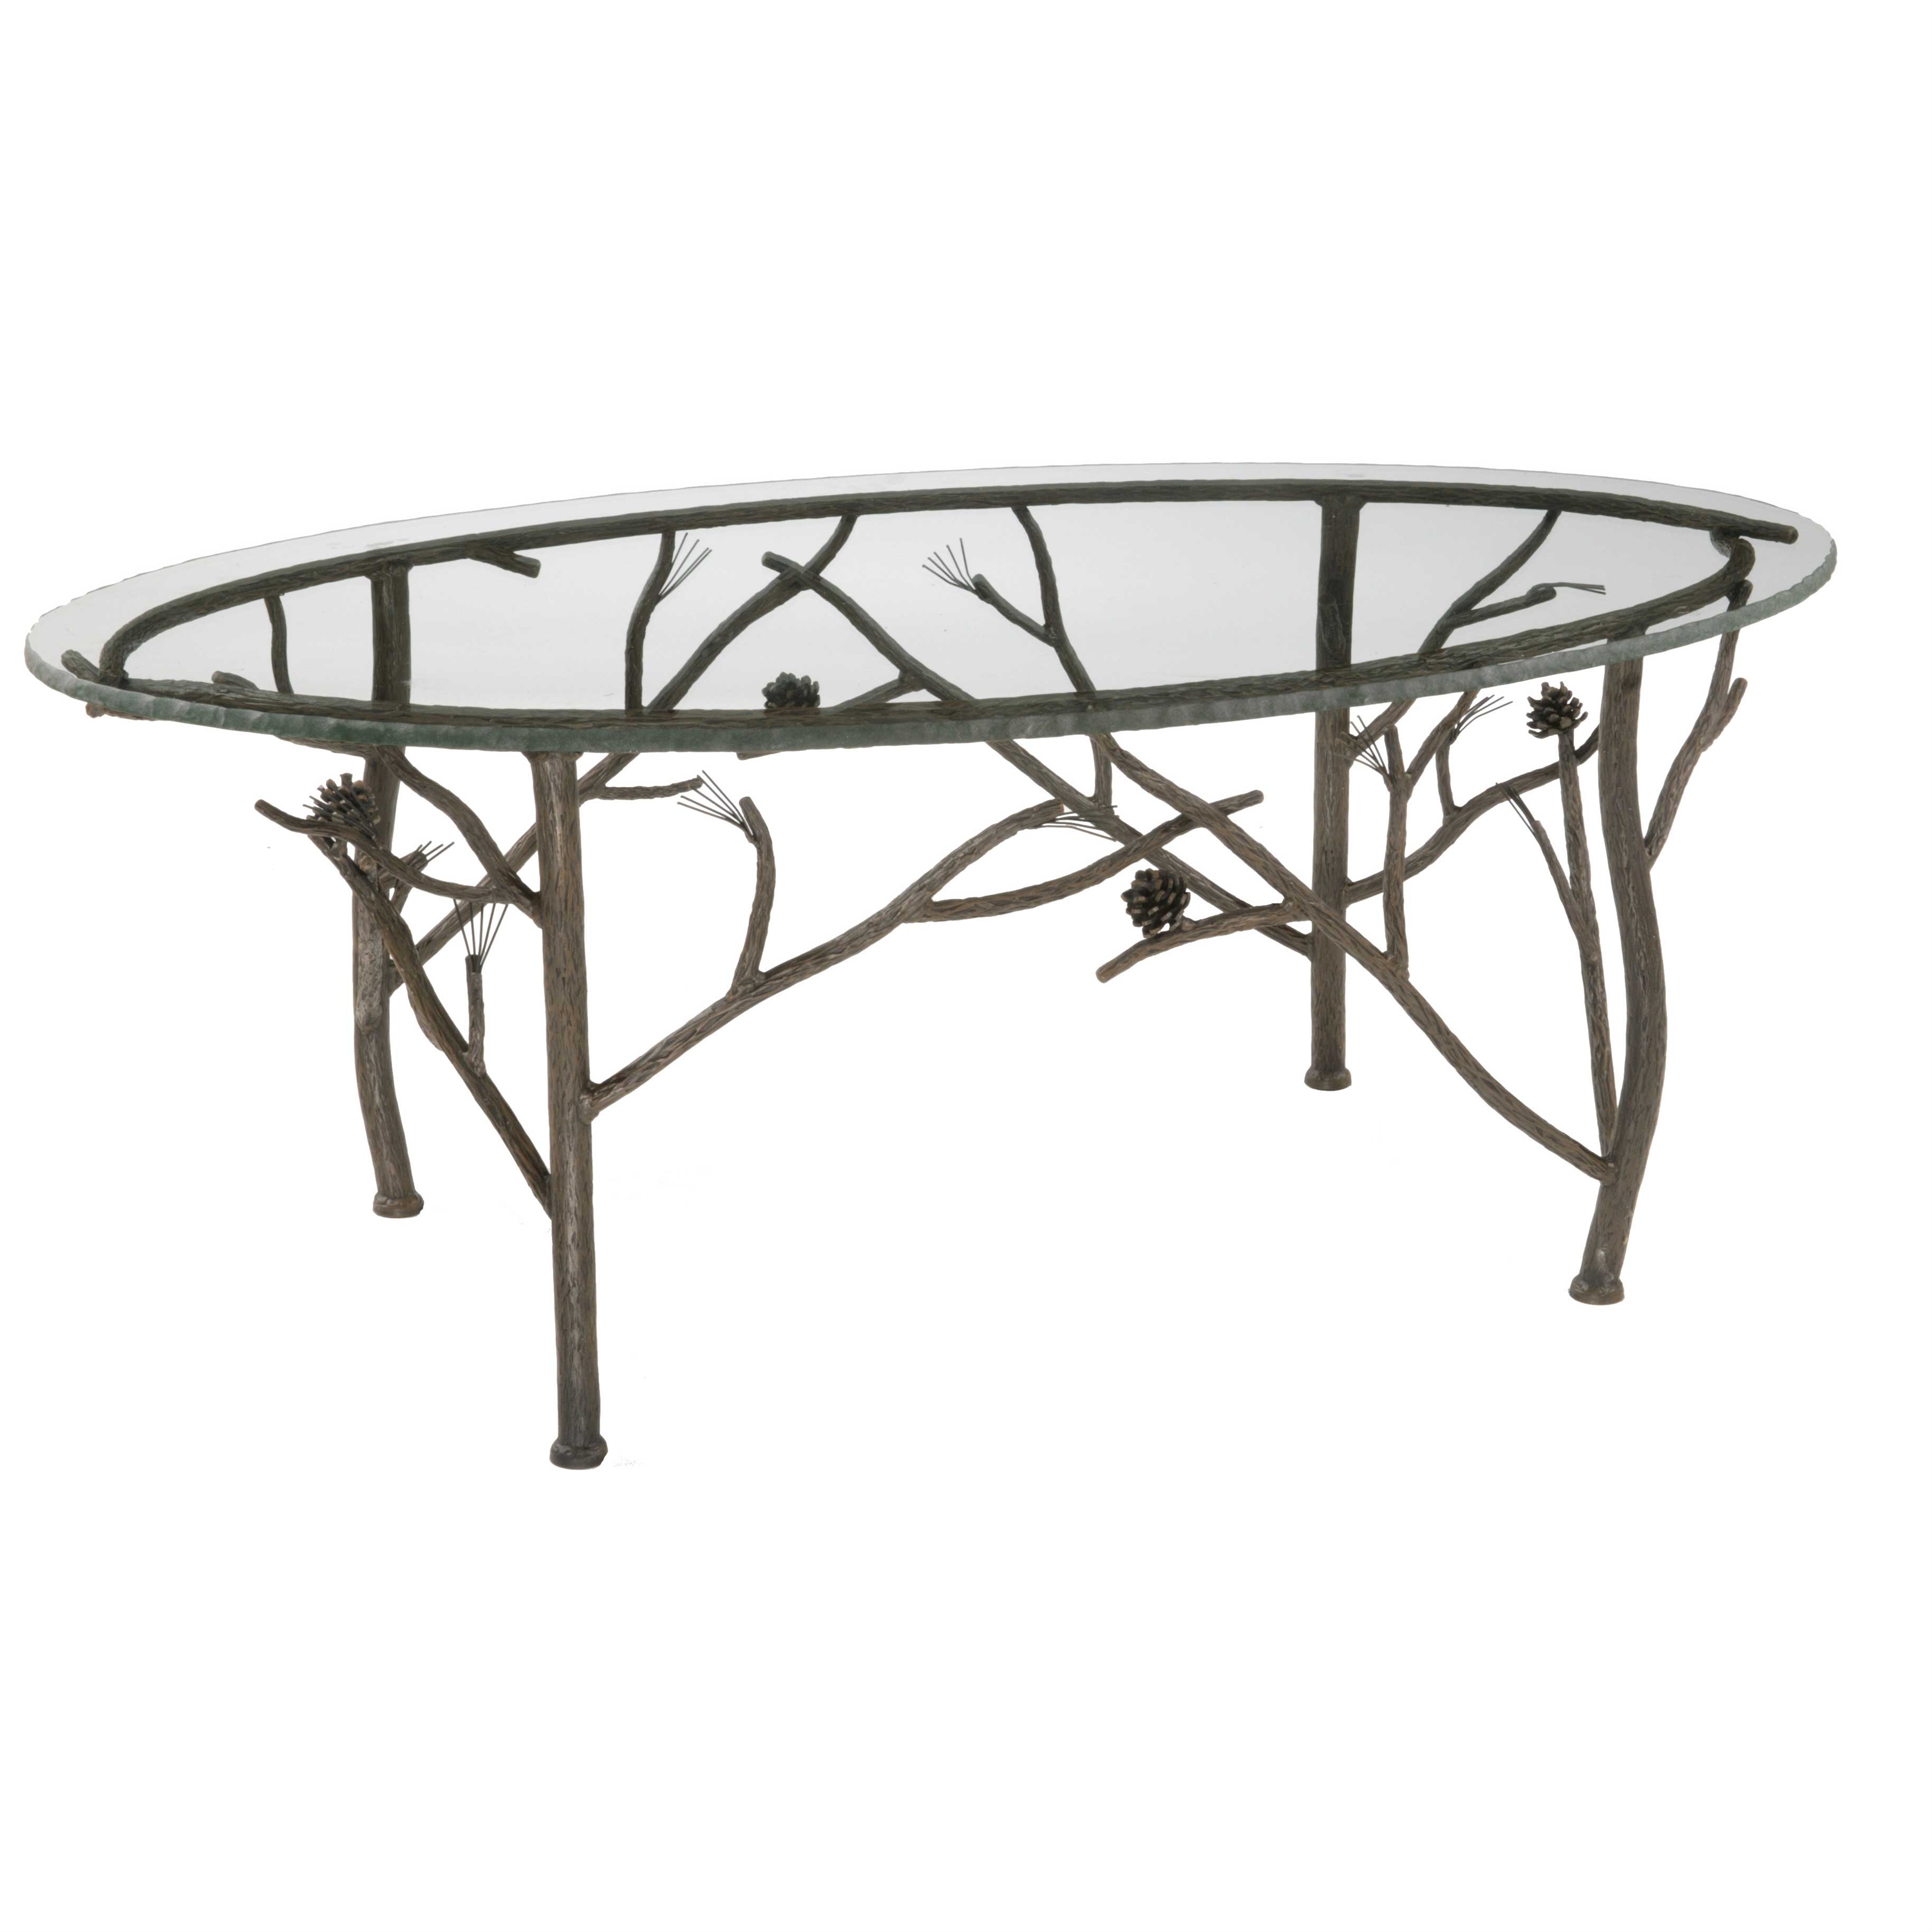 patio wrought tables plans end cast round legs black base pipe iron table metal wood accent glass outdoor vintage frames rustic top and drum full size wichita furniture decorative